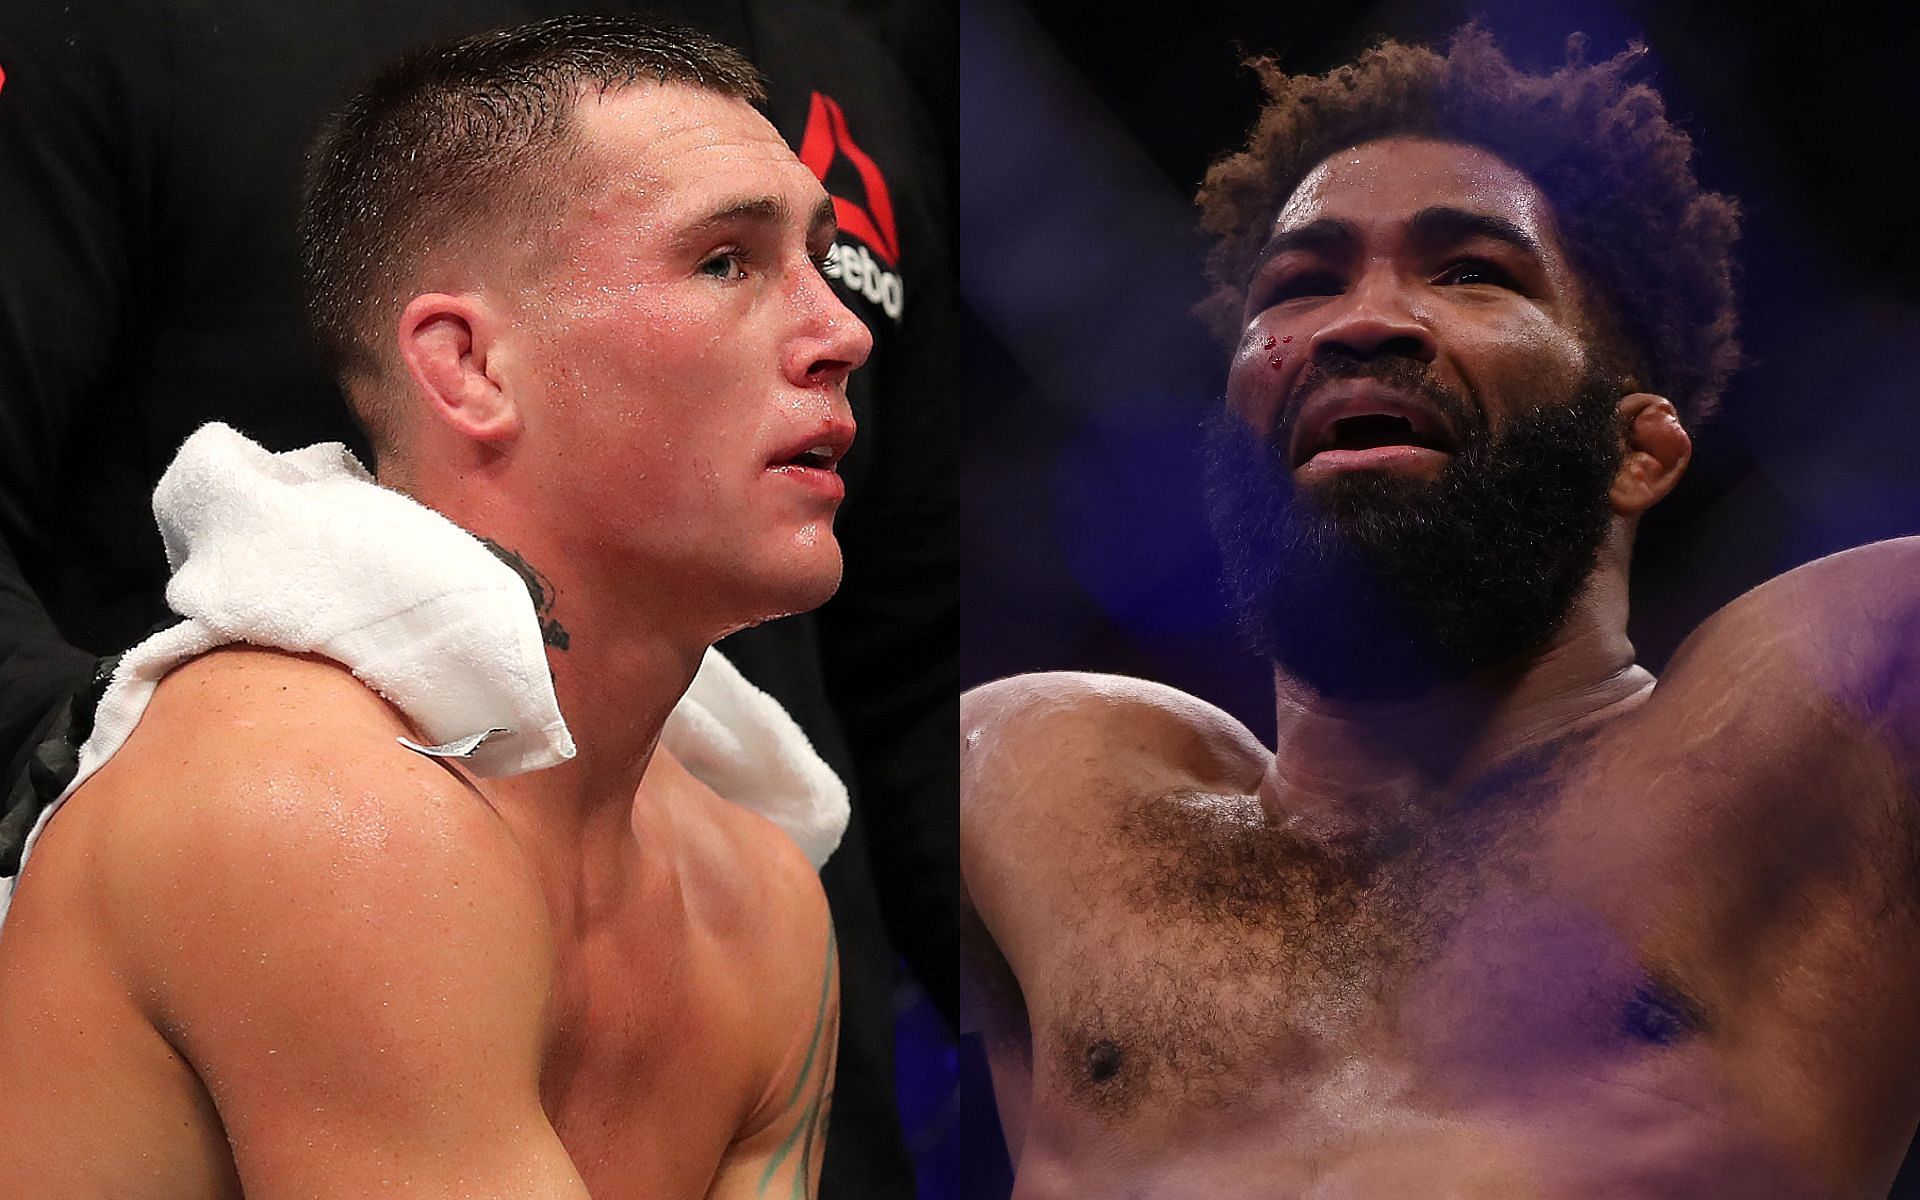 Darren Till (left) and Chris Curtis (right) (Images via Getty)